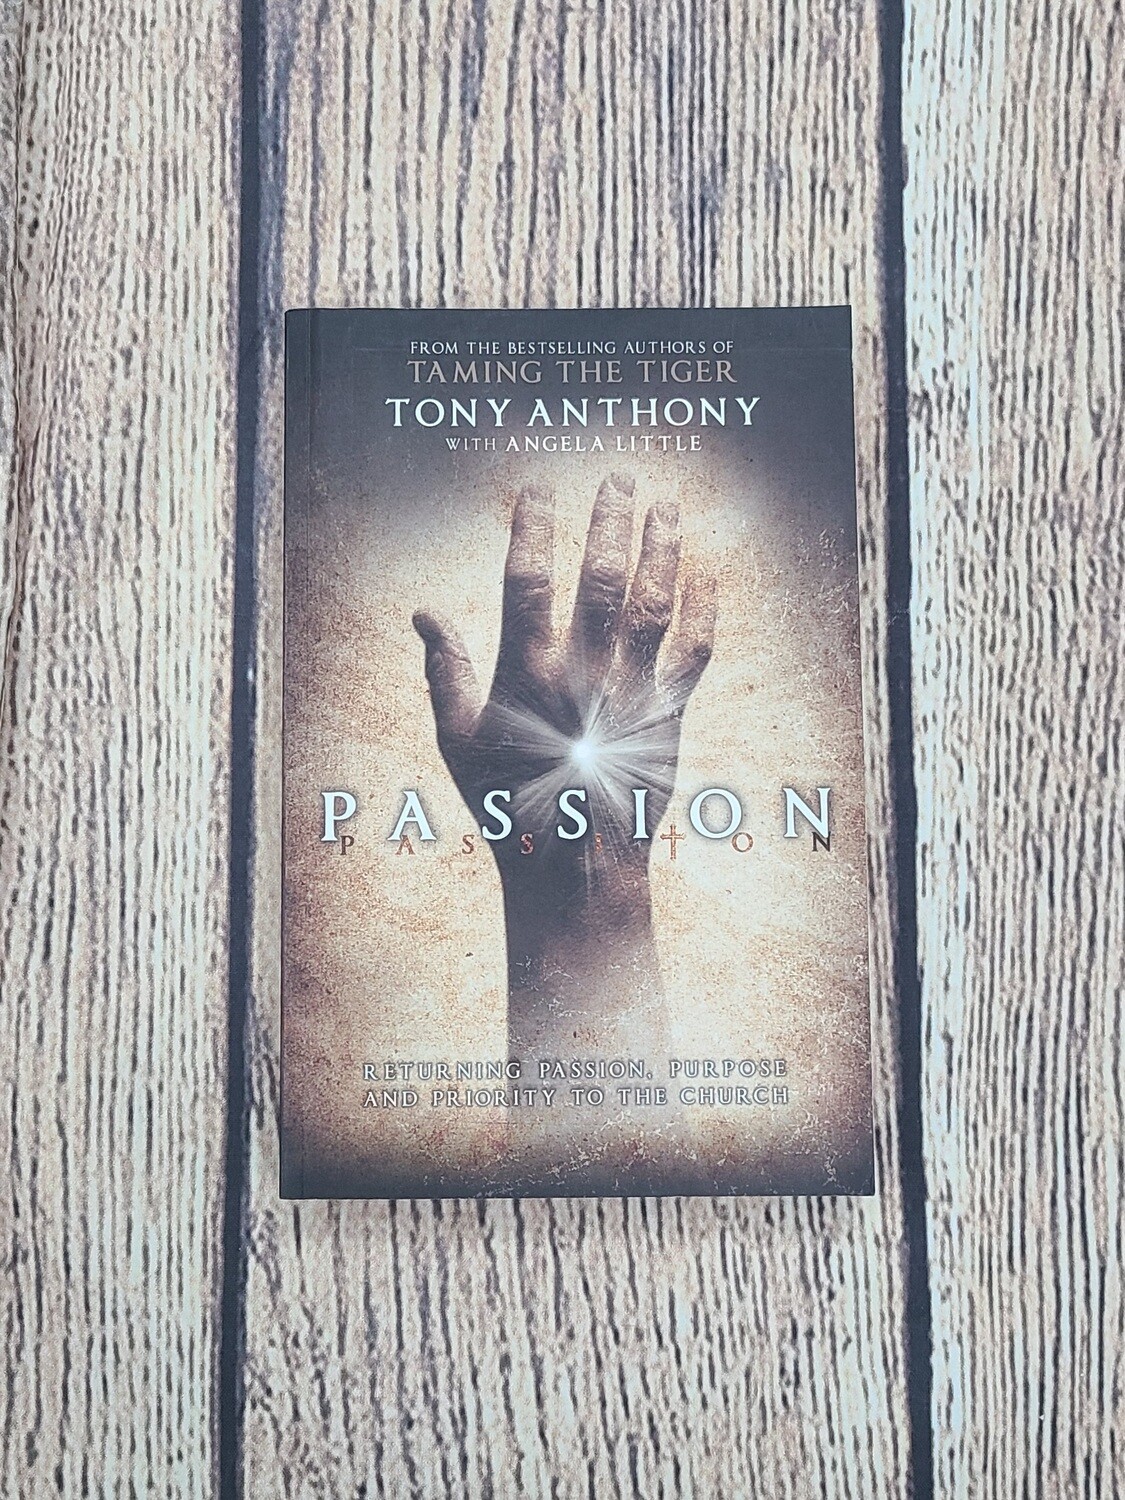 Passion by Tony Anthony with Angela Little